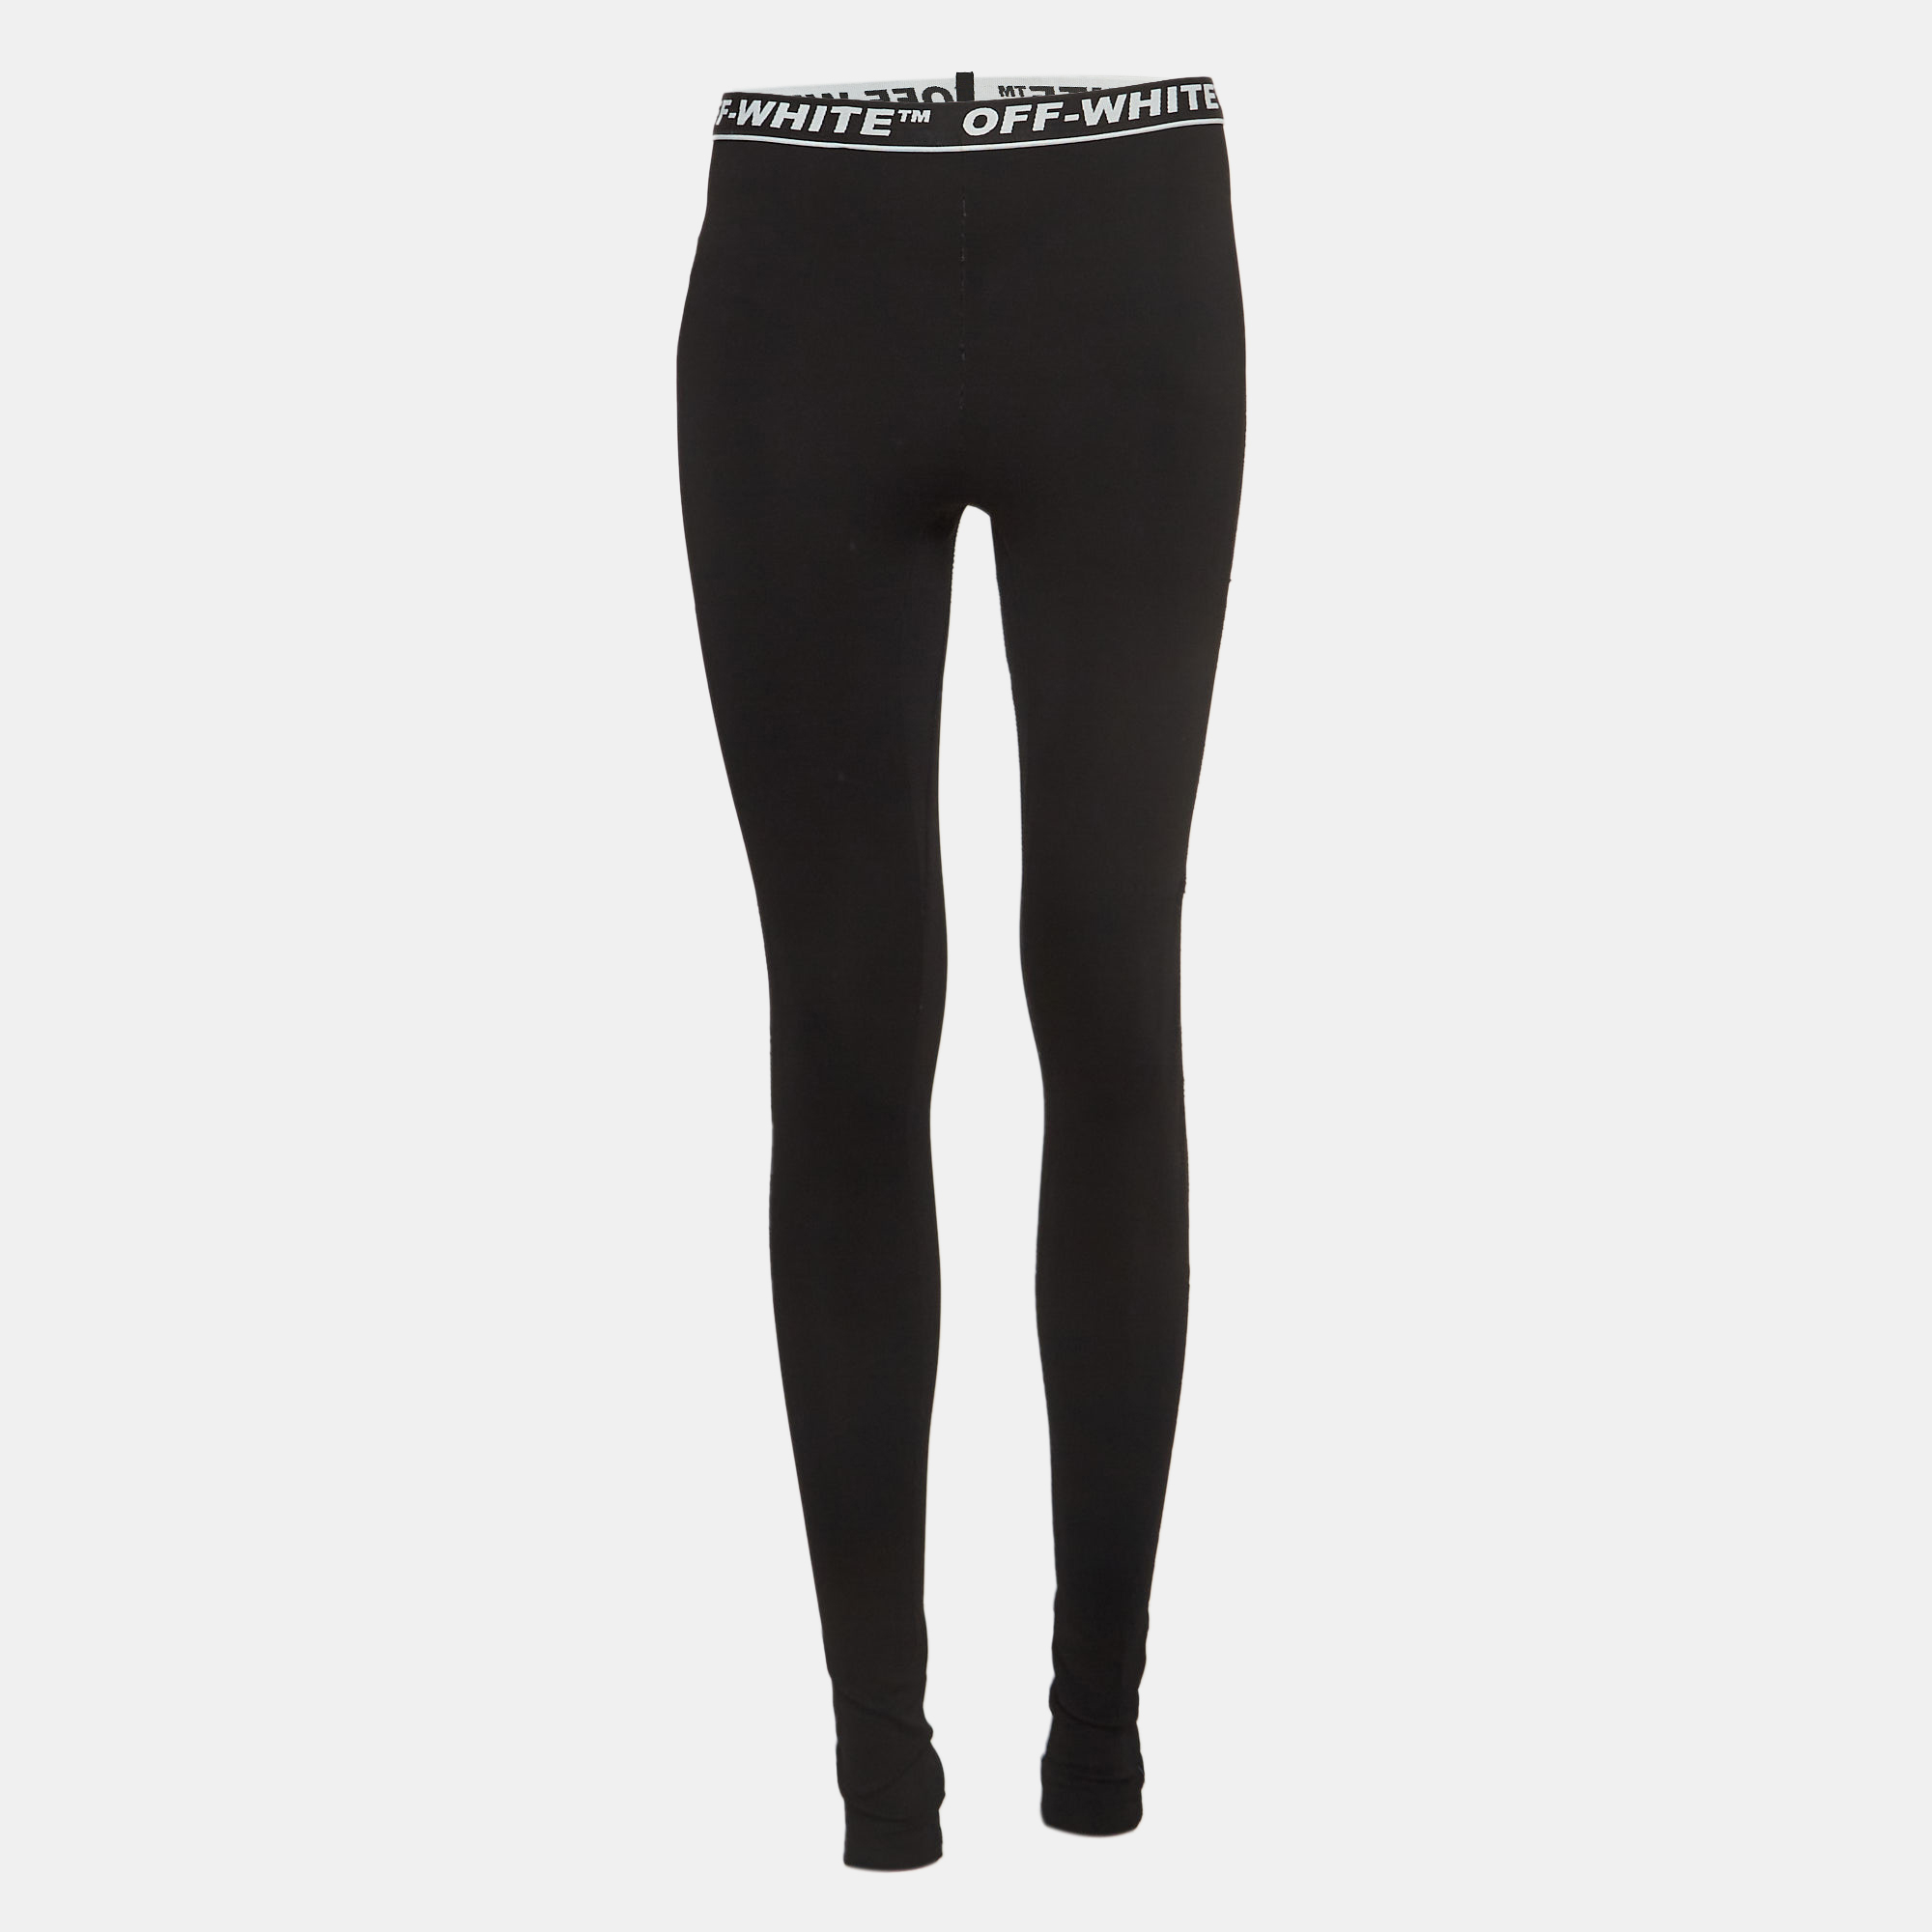 For your workout sessions lounging around or just running errands these leggings will come in handy multiple times. They are made from quality materials and have a good fit.